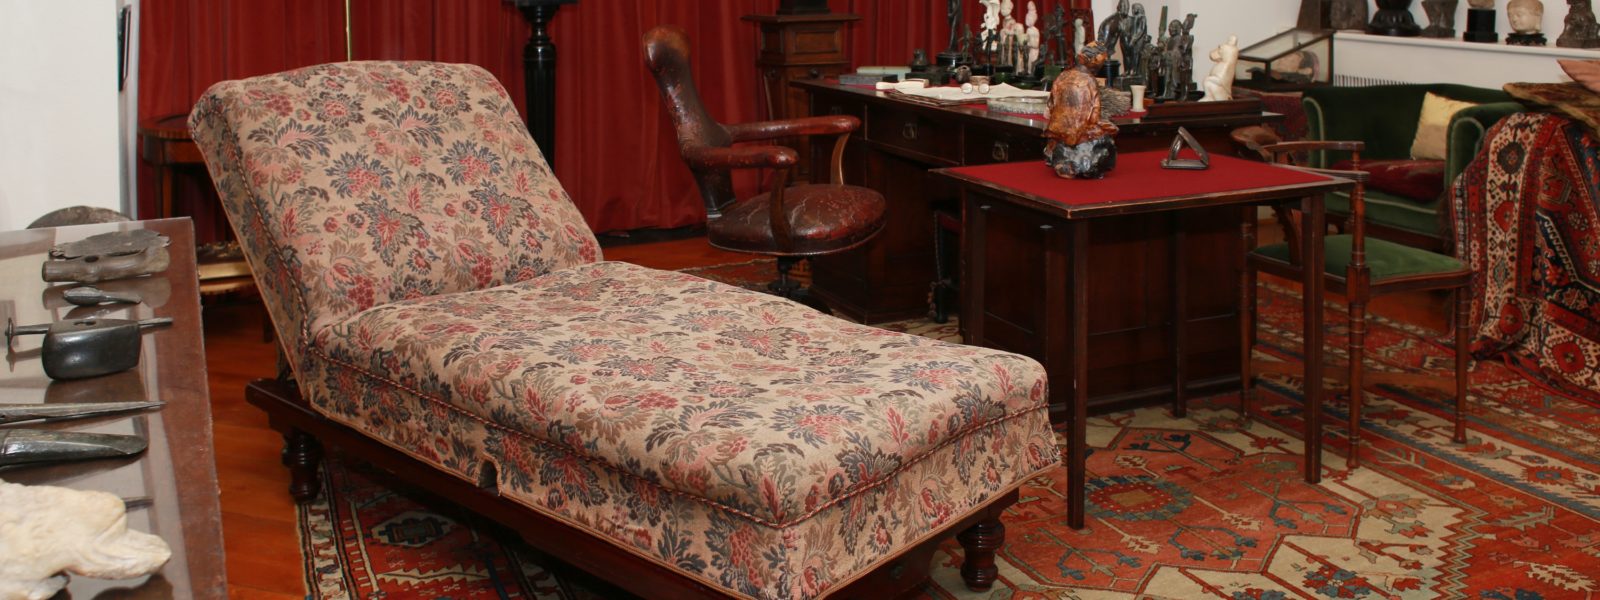 Freud's Death Bed